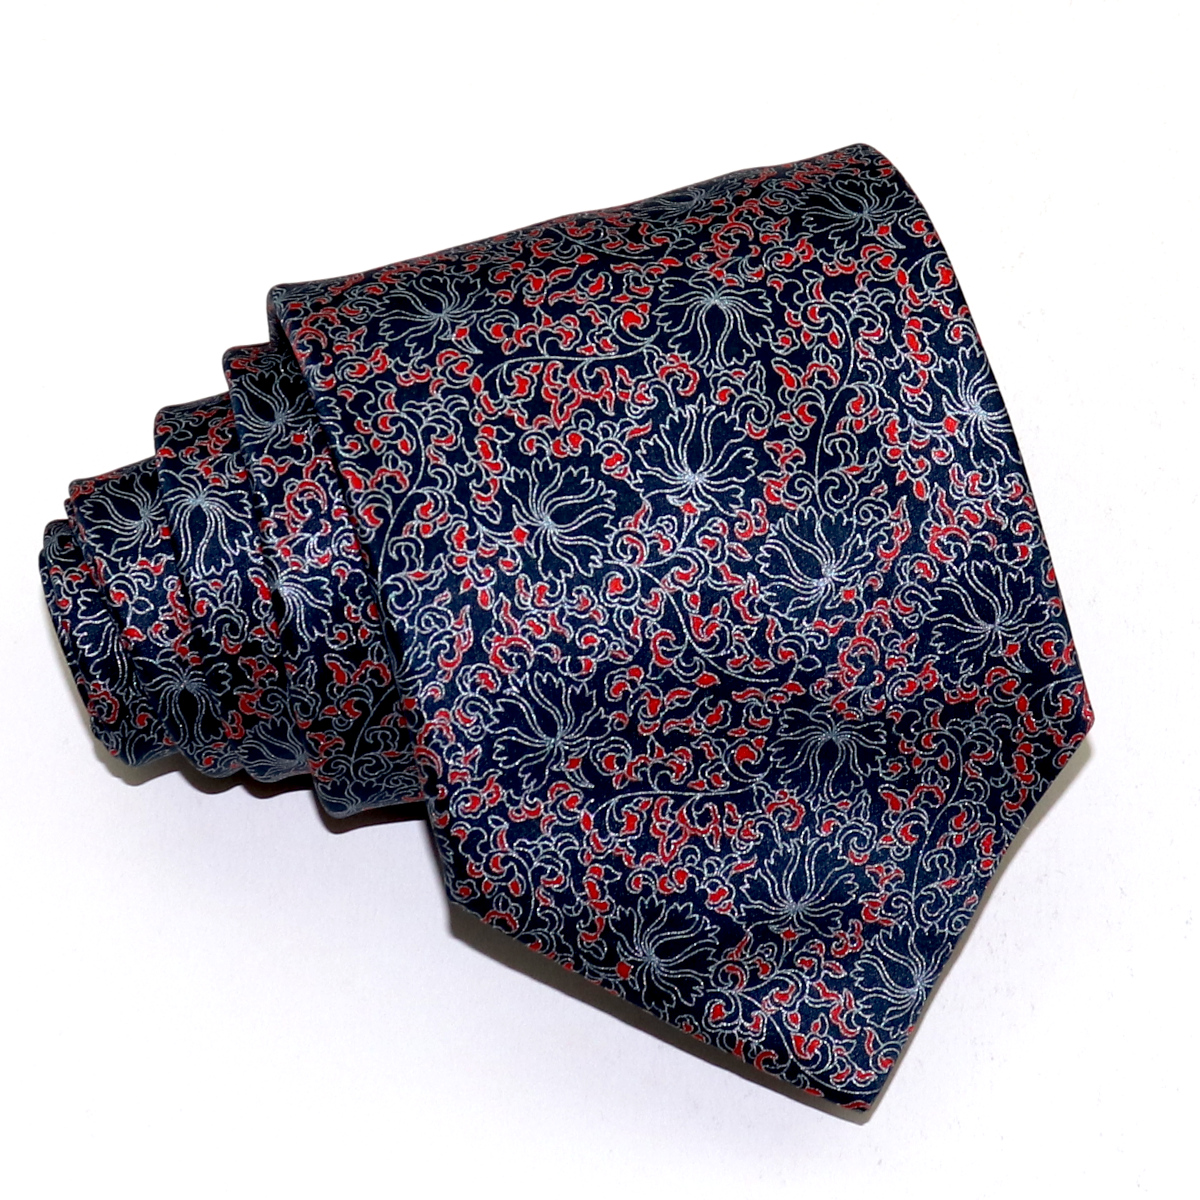 Navy blue and red silk tailored Custom tie, refined floral pattern ...